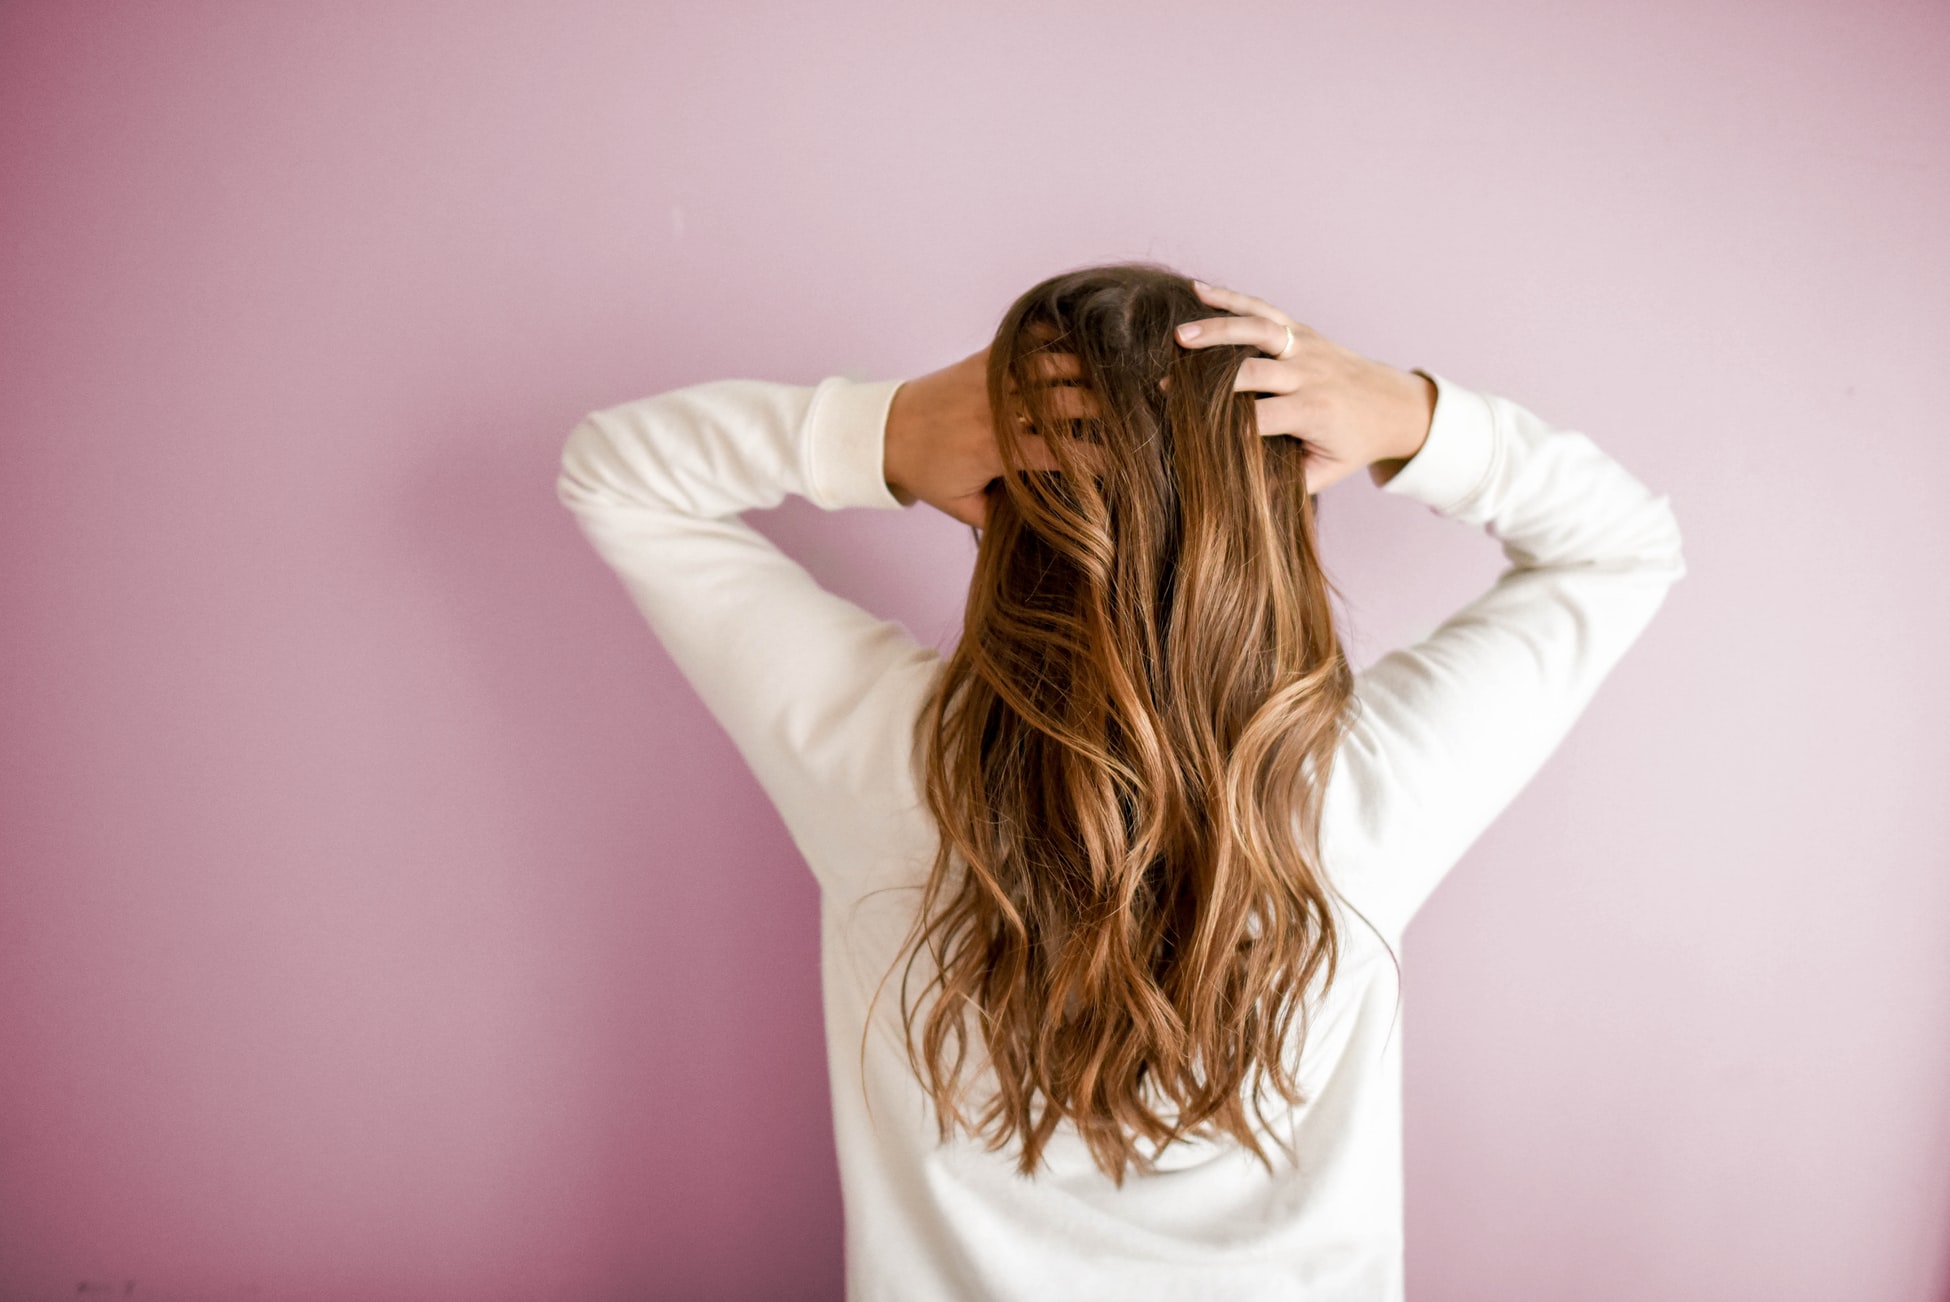 how to get rid of dry itchy flakey scalp